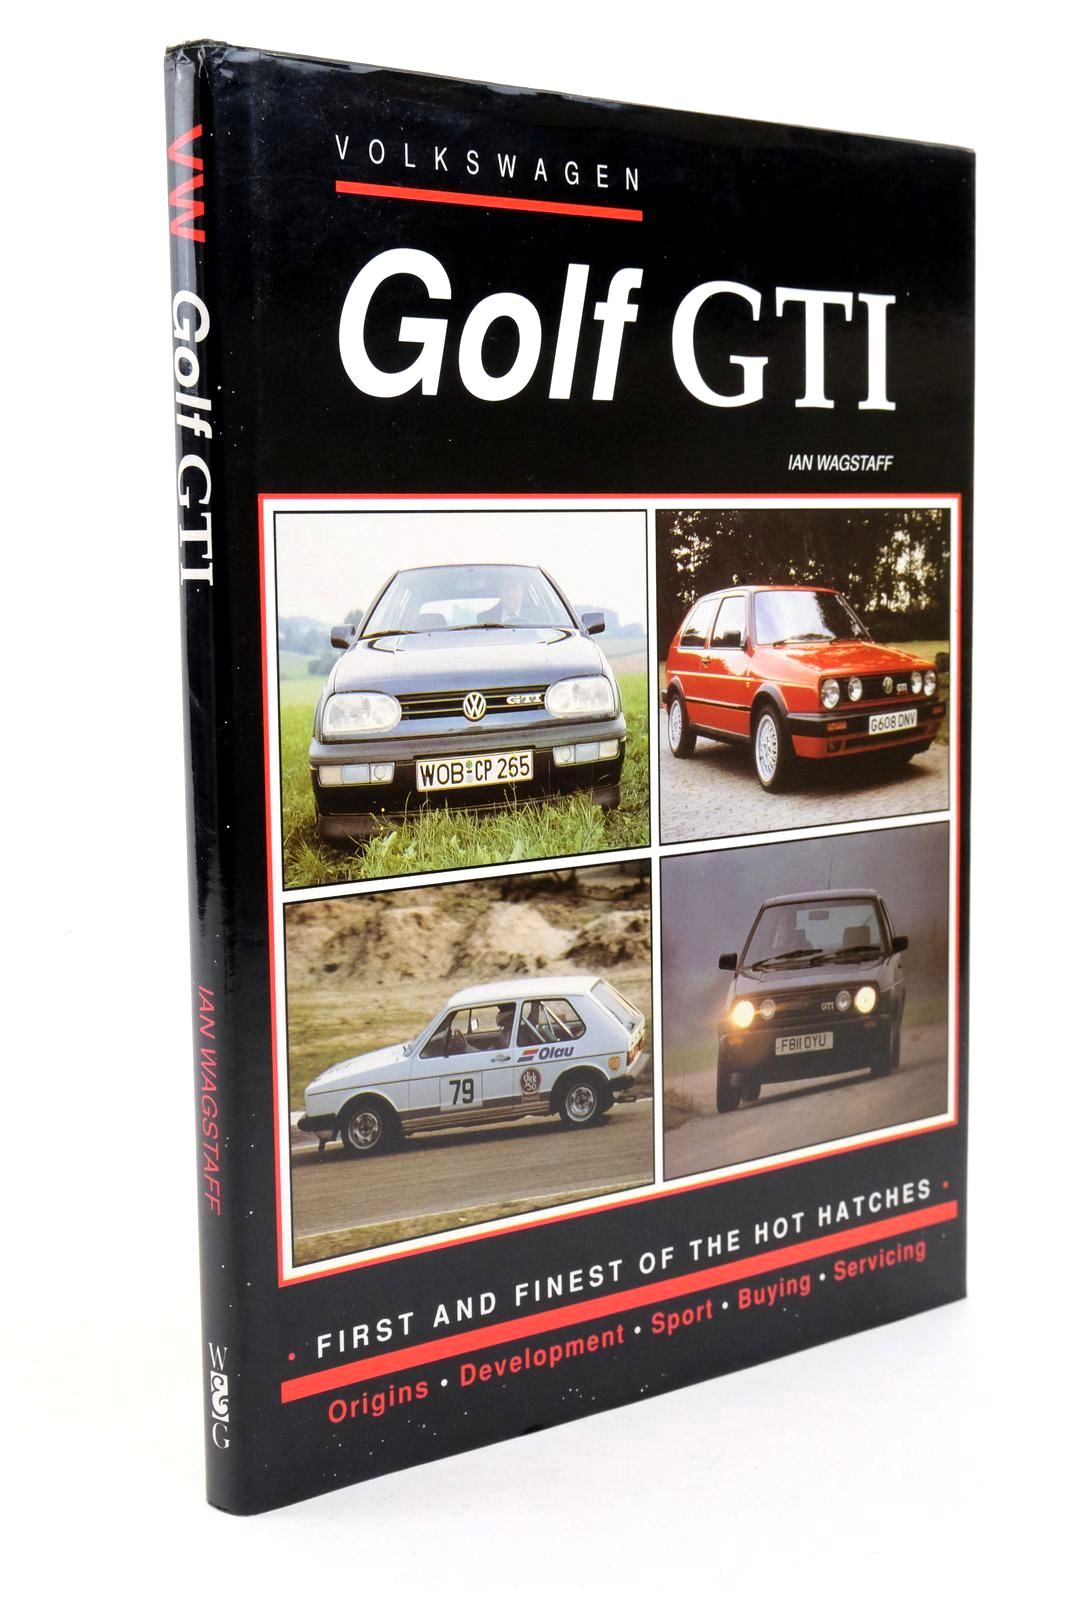 Photo of VOLKSWAGEN GOLF GTI written by Wagstaff, Ian published by Windrow & Greene (STOCK CODE: 1322848)  for sale by Stella & Rose's Books